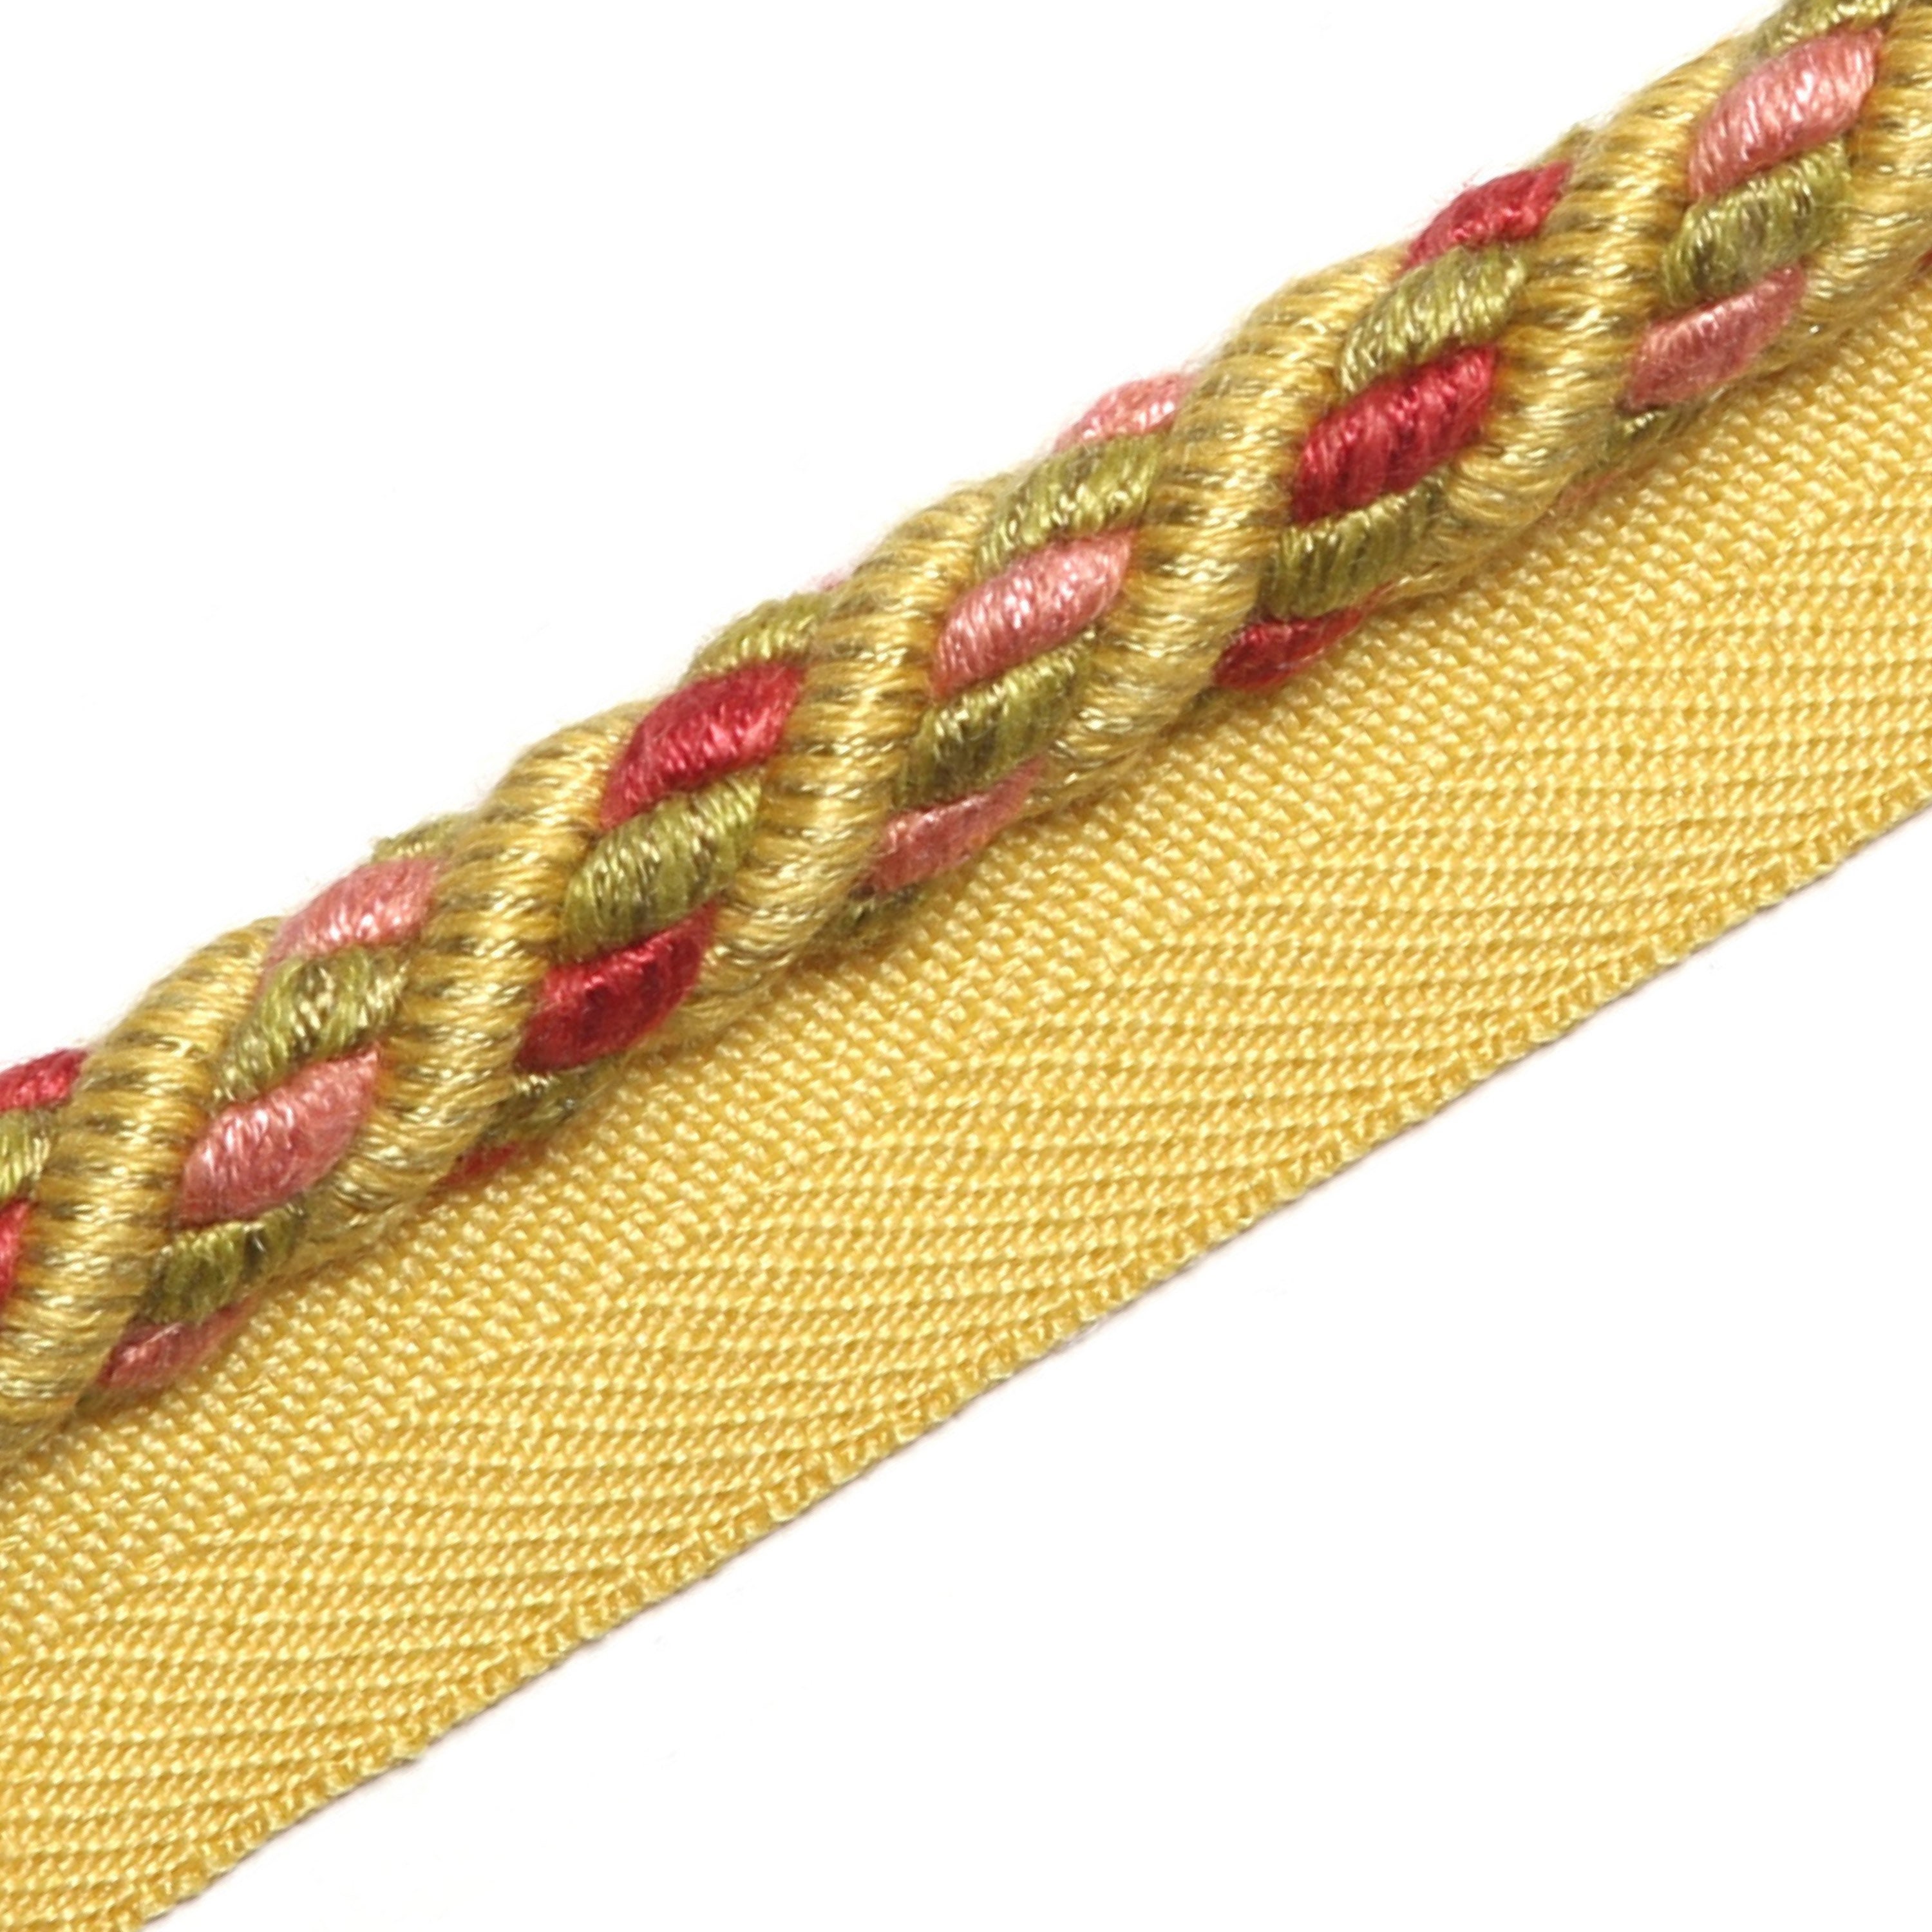 Pachino Woven, Product Details